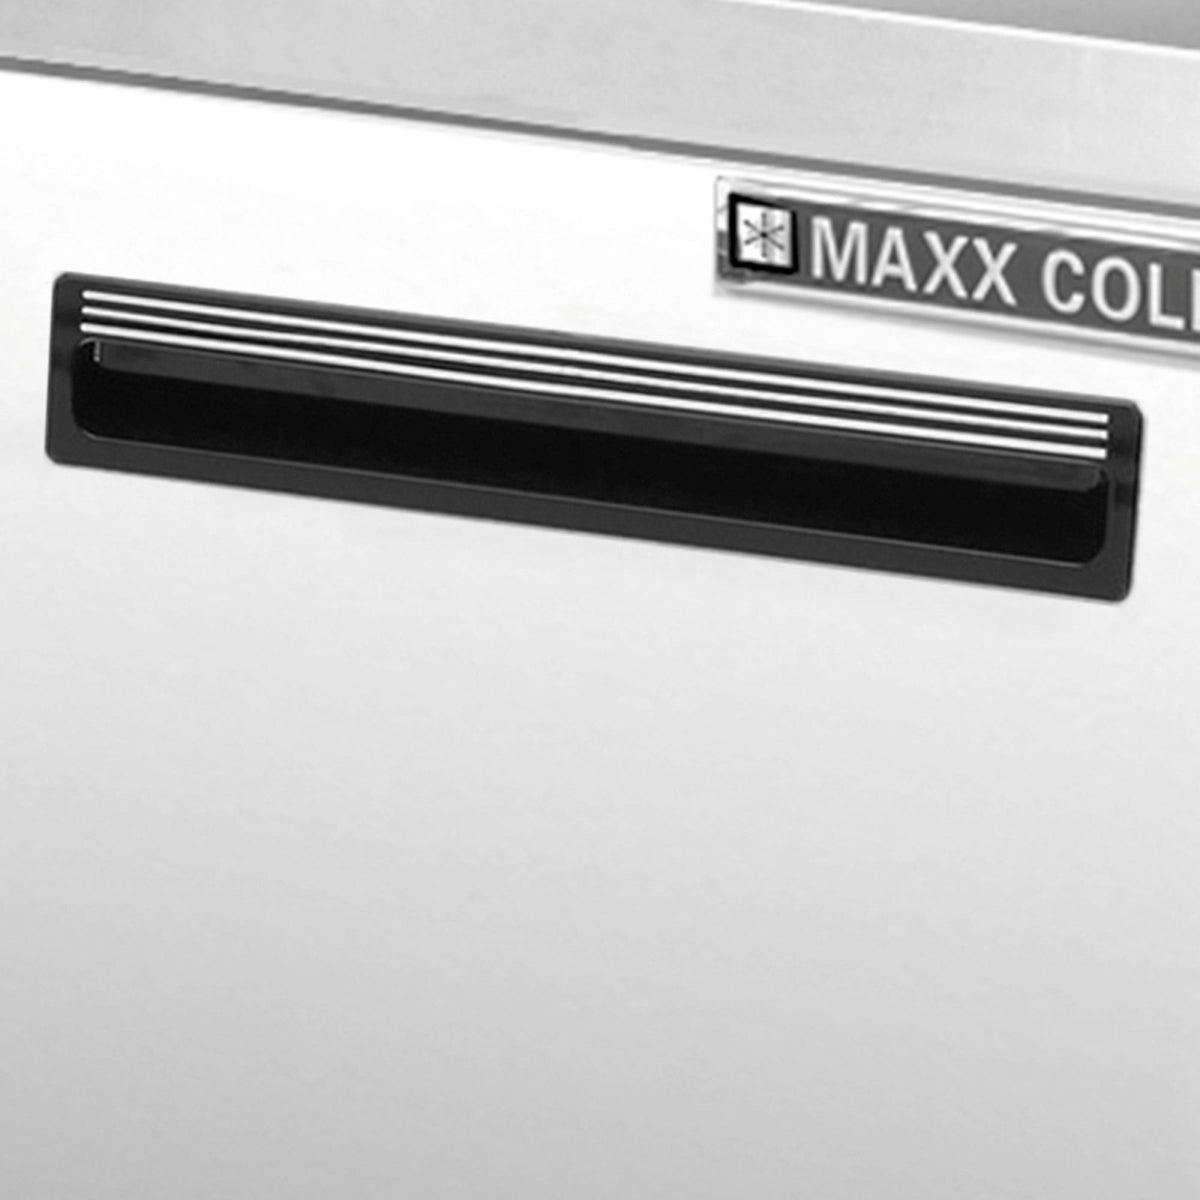 Maxx Cold MXCR27UHC Single Door Undercounter Refrigerator, 27.5"W, 6.5 cu. ft. Storage Capacity, in Stainless Steel - TheChefStore.Com